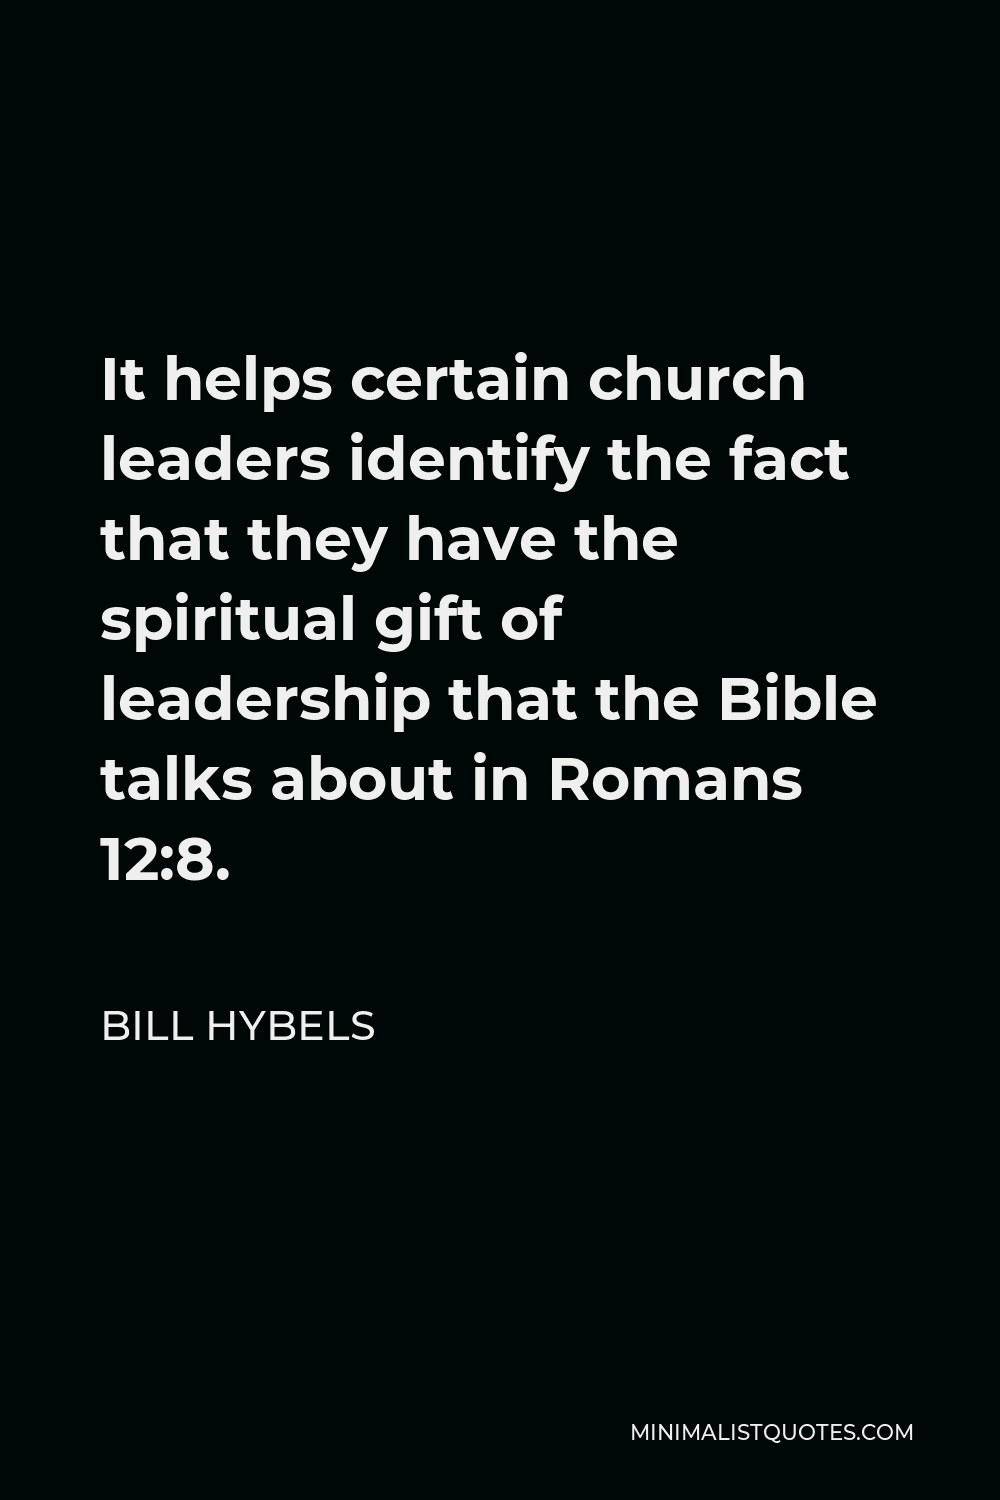 Bill Hybels Quote - It helps certain church leaders identify the fact that they have the spiritual gift of leadership that the Bible talks about in Romans 12:8.